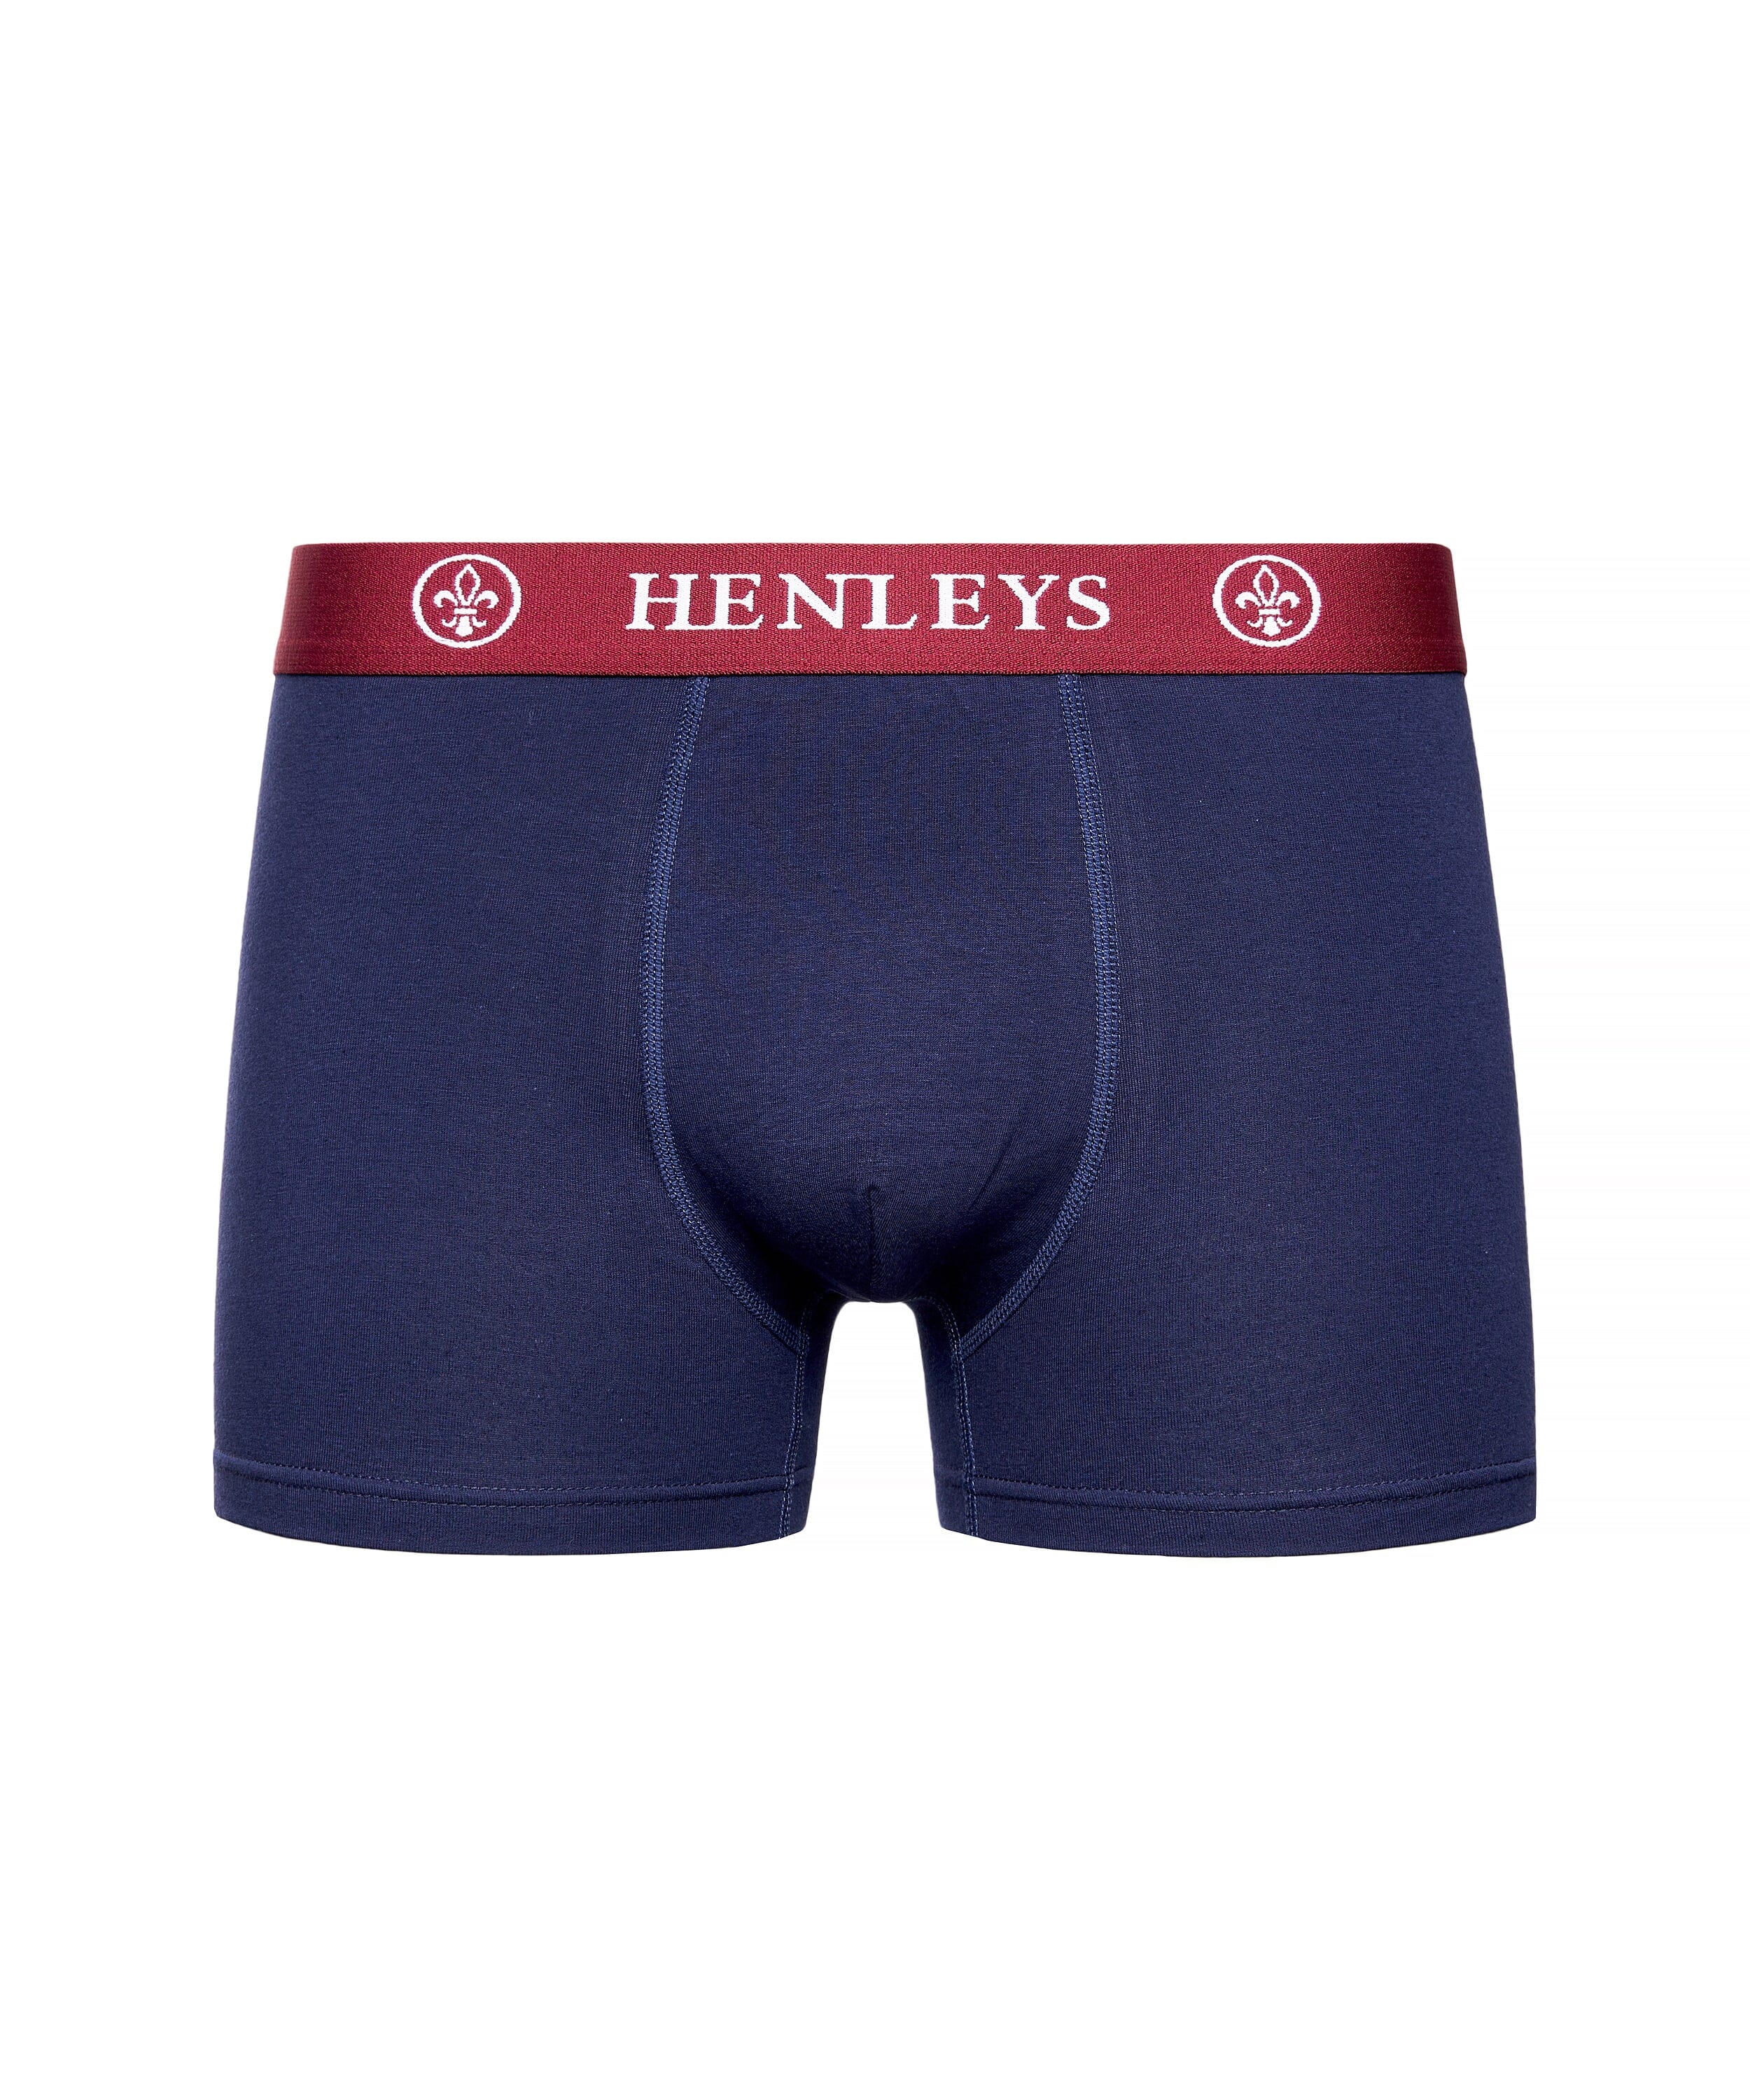 Rutlers Boxers 3pk Assorted